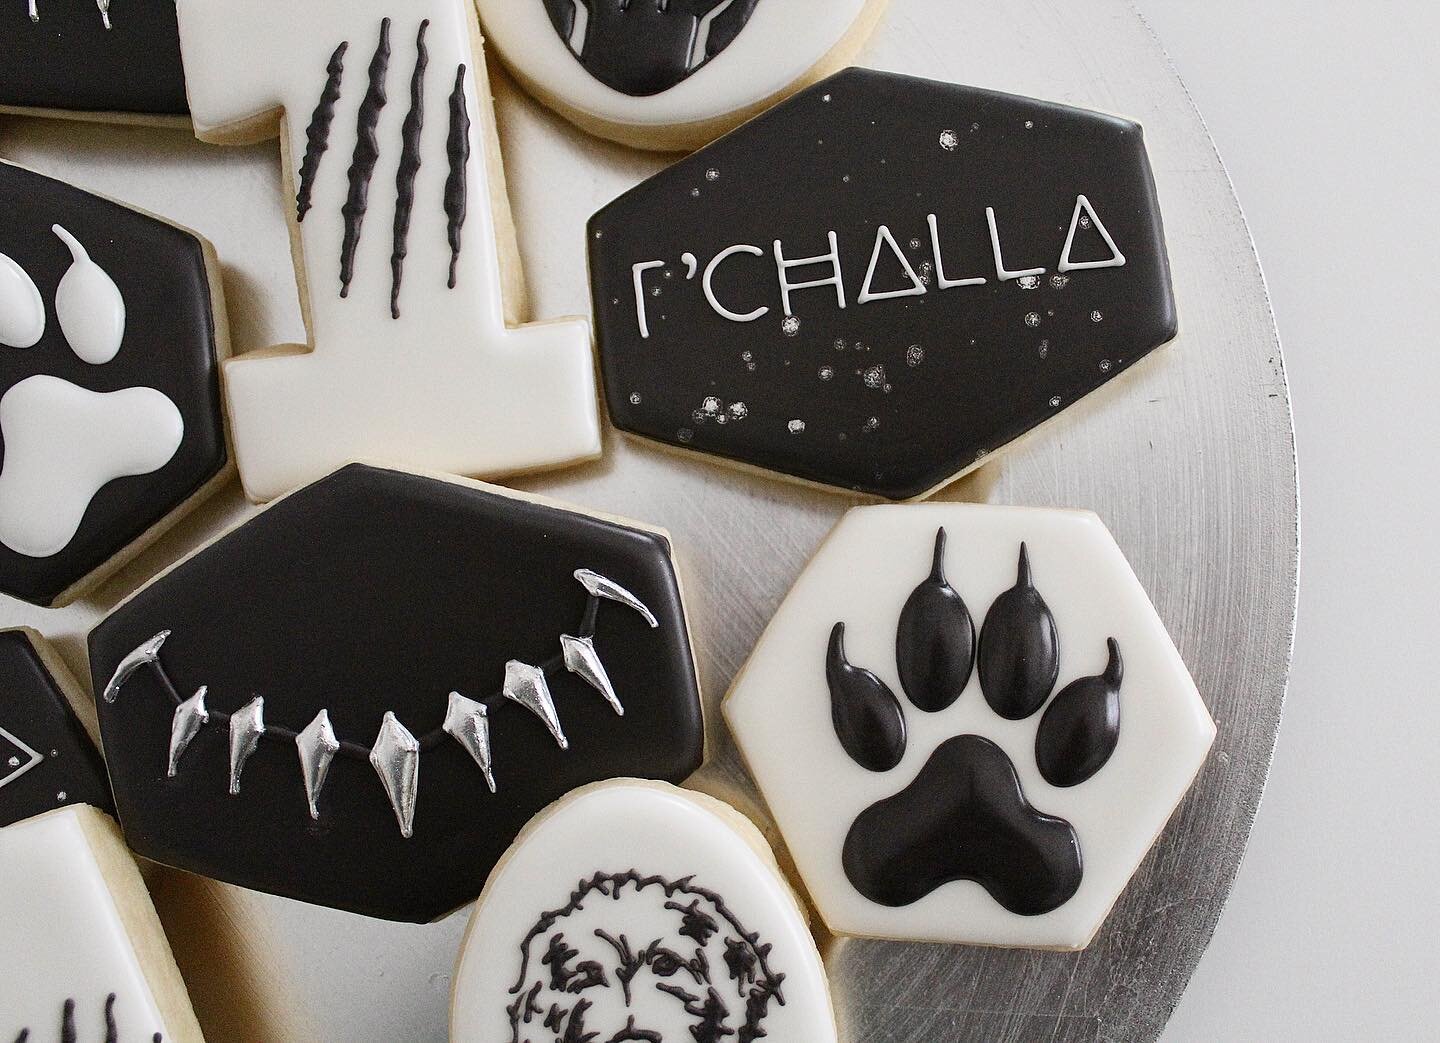 Happy 1st birthday to a sweet 🐶 named after black panther! 🐆 
.
.
.
.
.
.
.
.
.
.
#birthdaycookies #sugarcookies #sugarcookiesofinstagram #blackpanthercookies #dogcookies #utahcustomcookies #slccustomcookies #panthercookies #cookies #royalicingcook